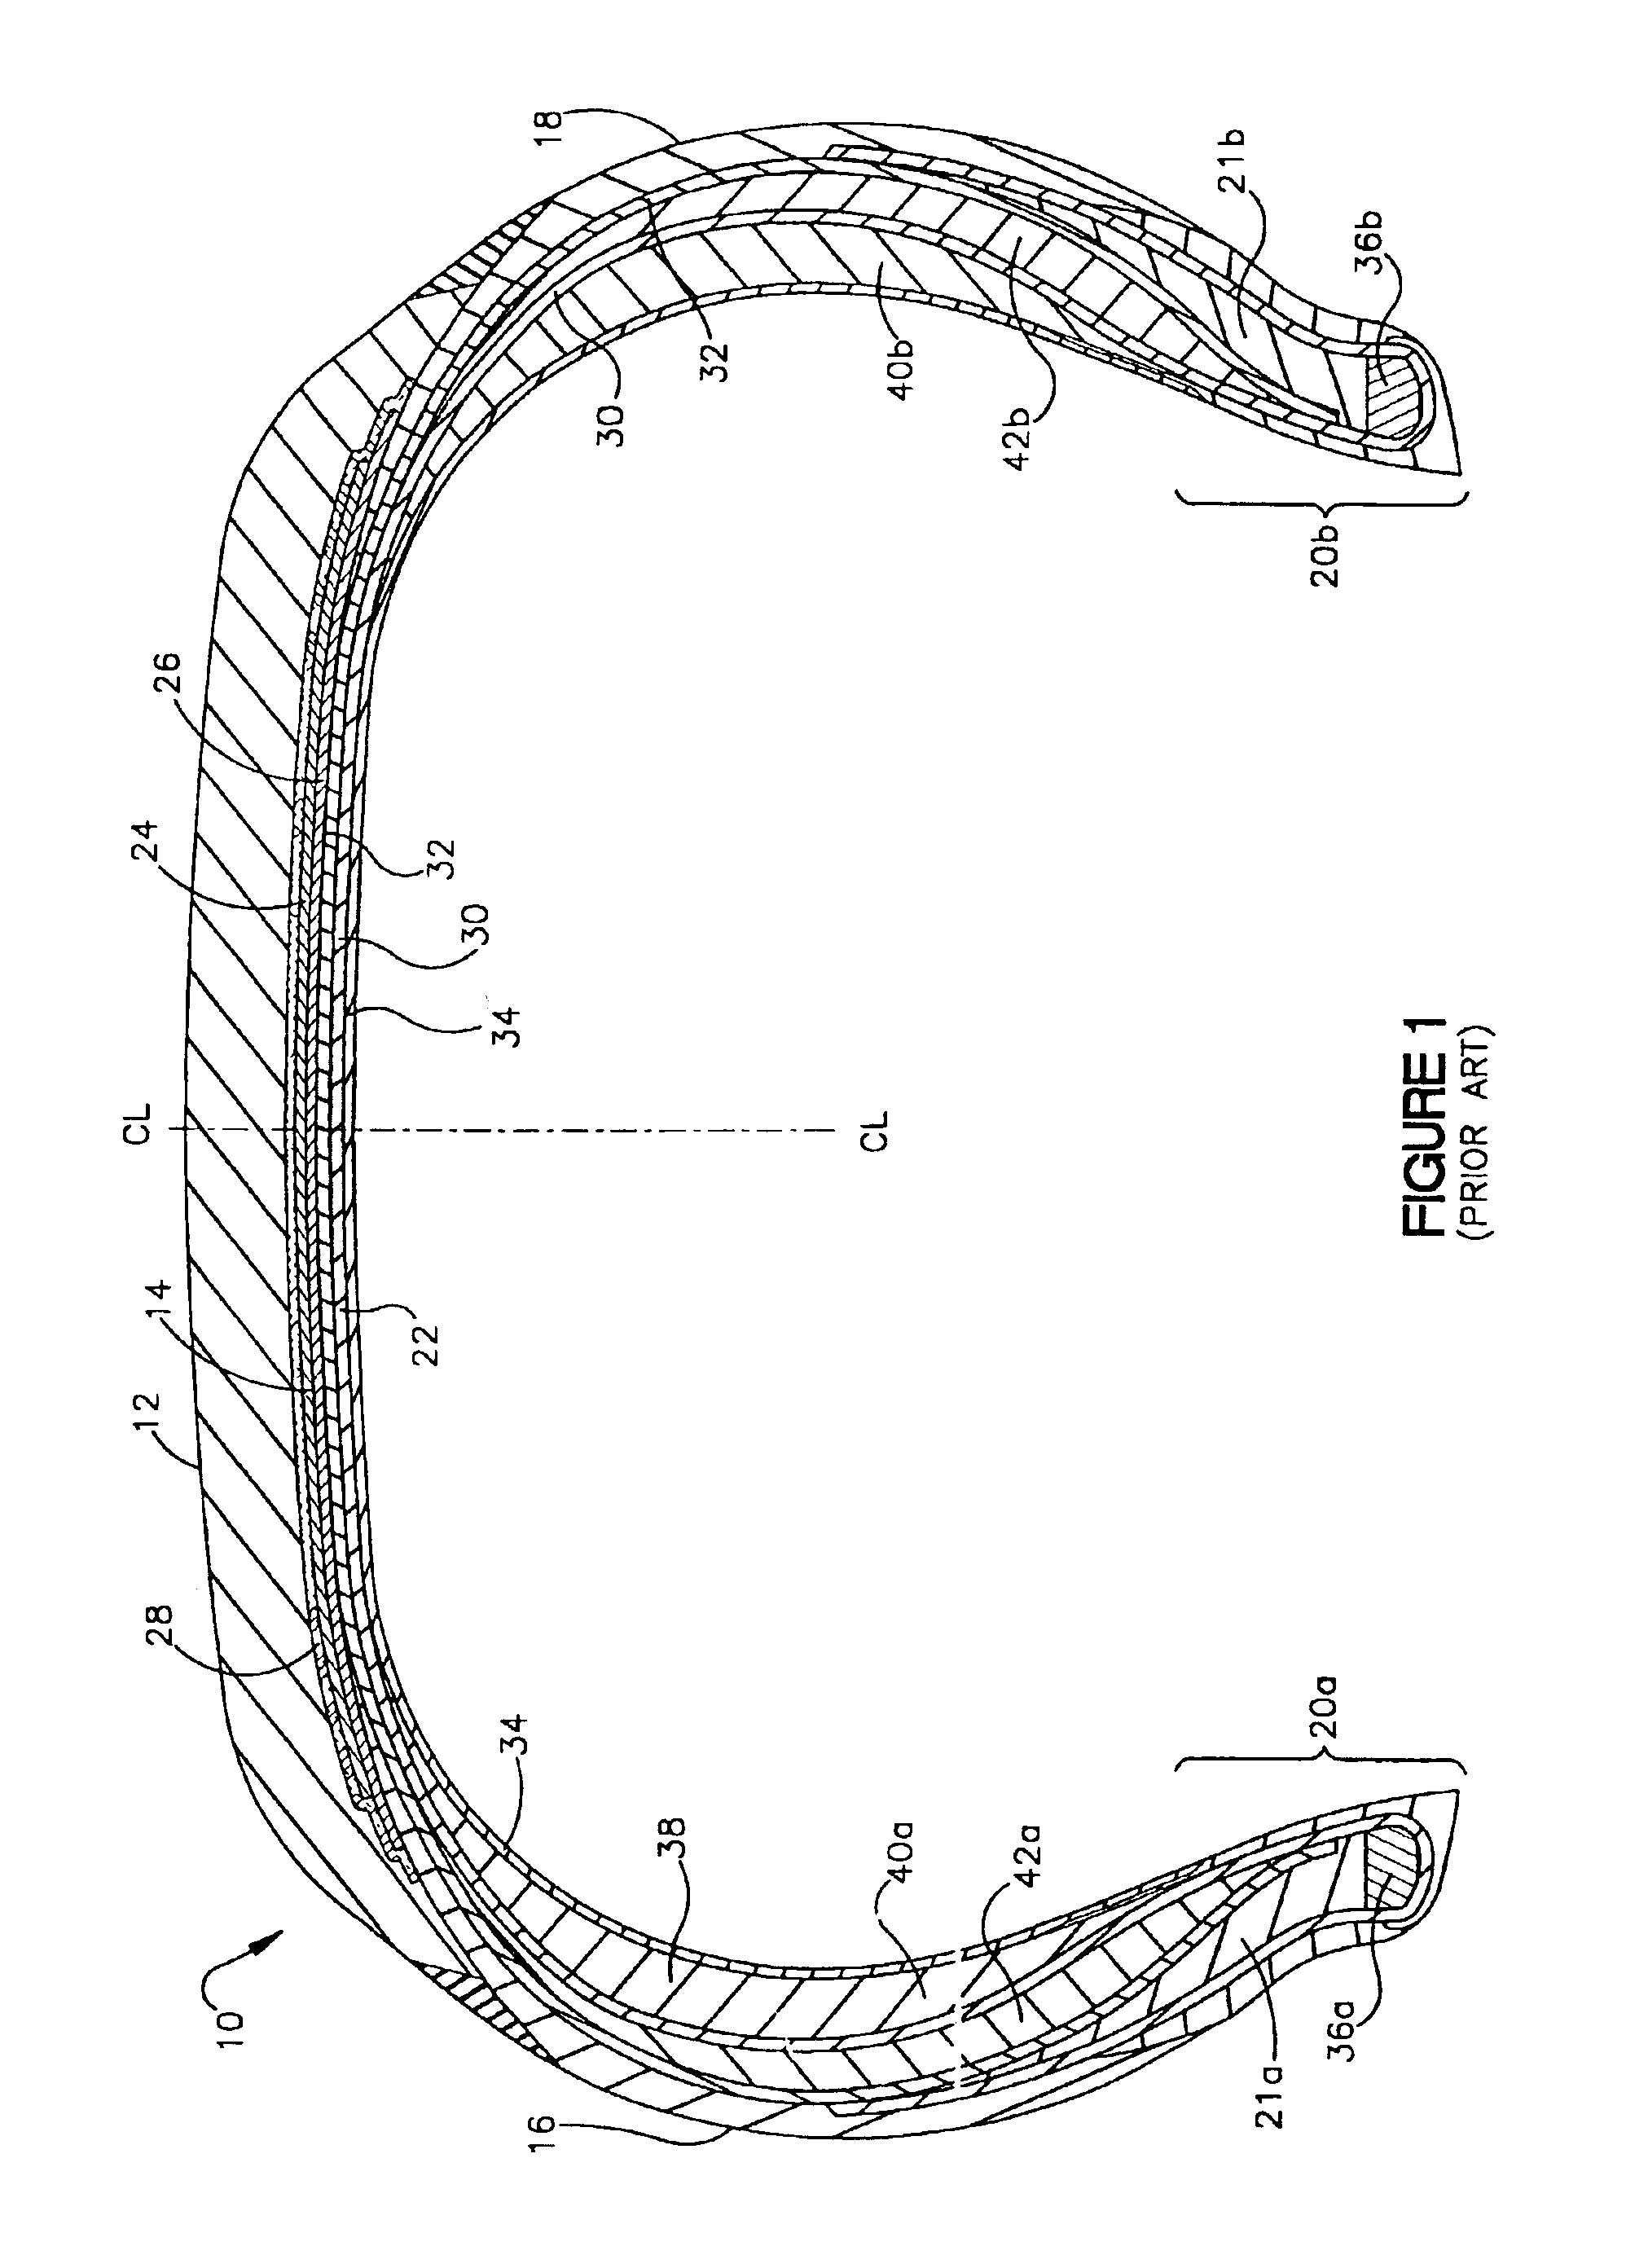 Variable-stiffness wedge insert for runflat tires